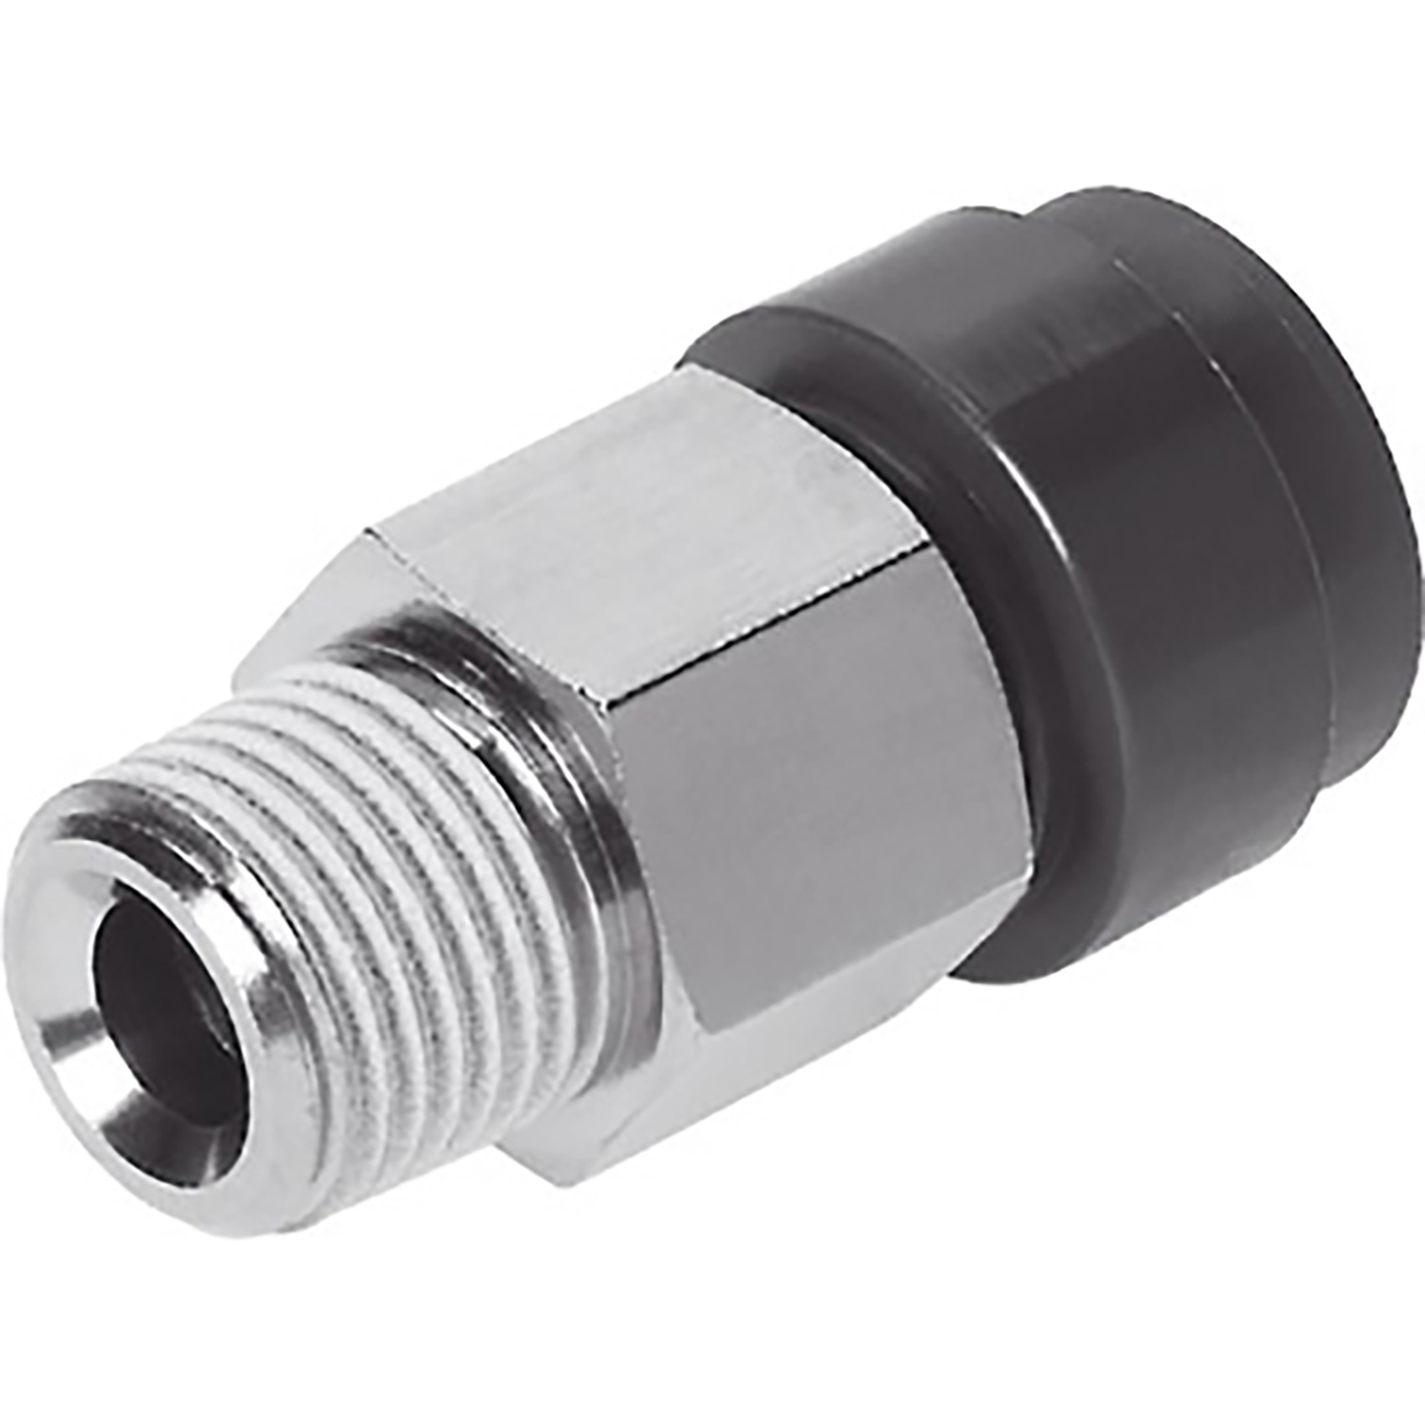 QS-V0-1/4-10 PUSH-IN FITTING sold in multiples of 10 only